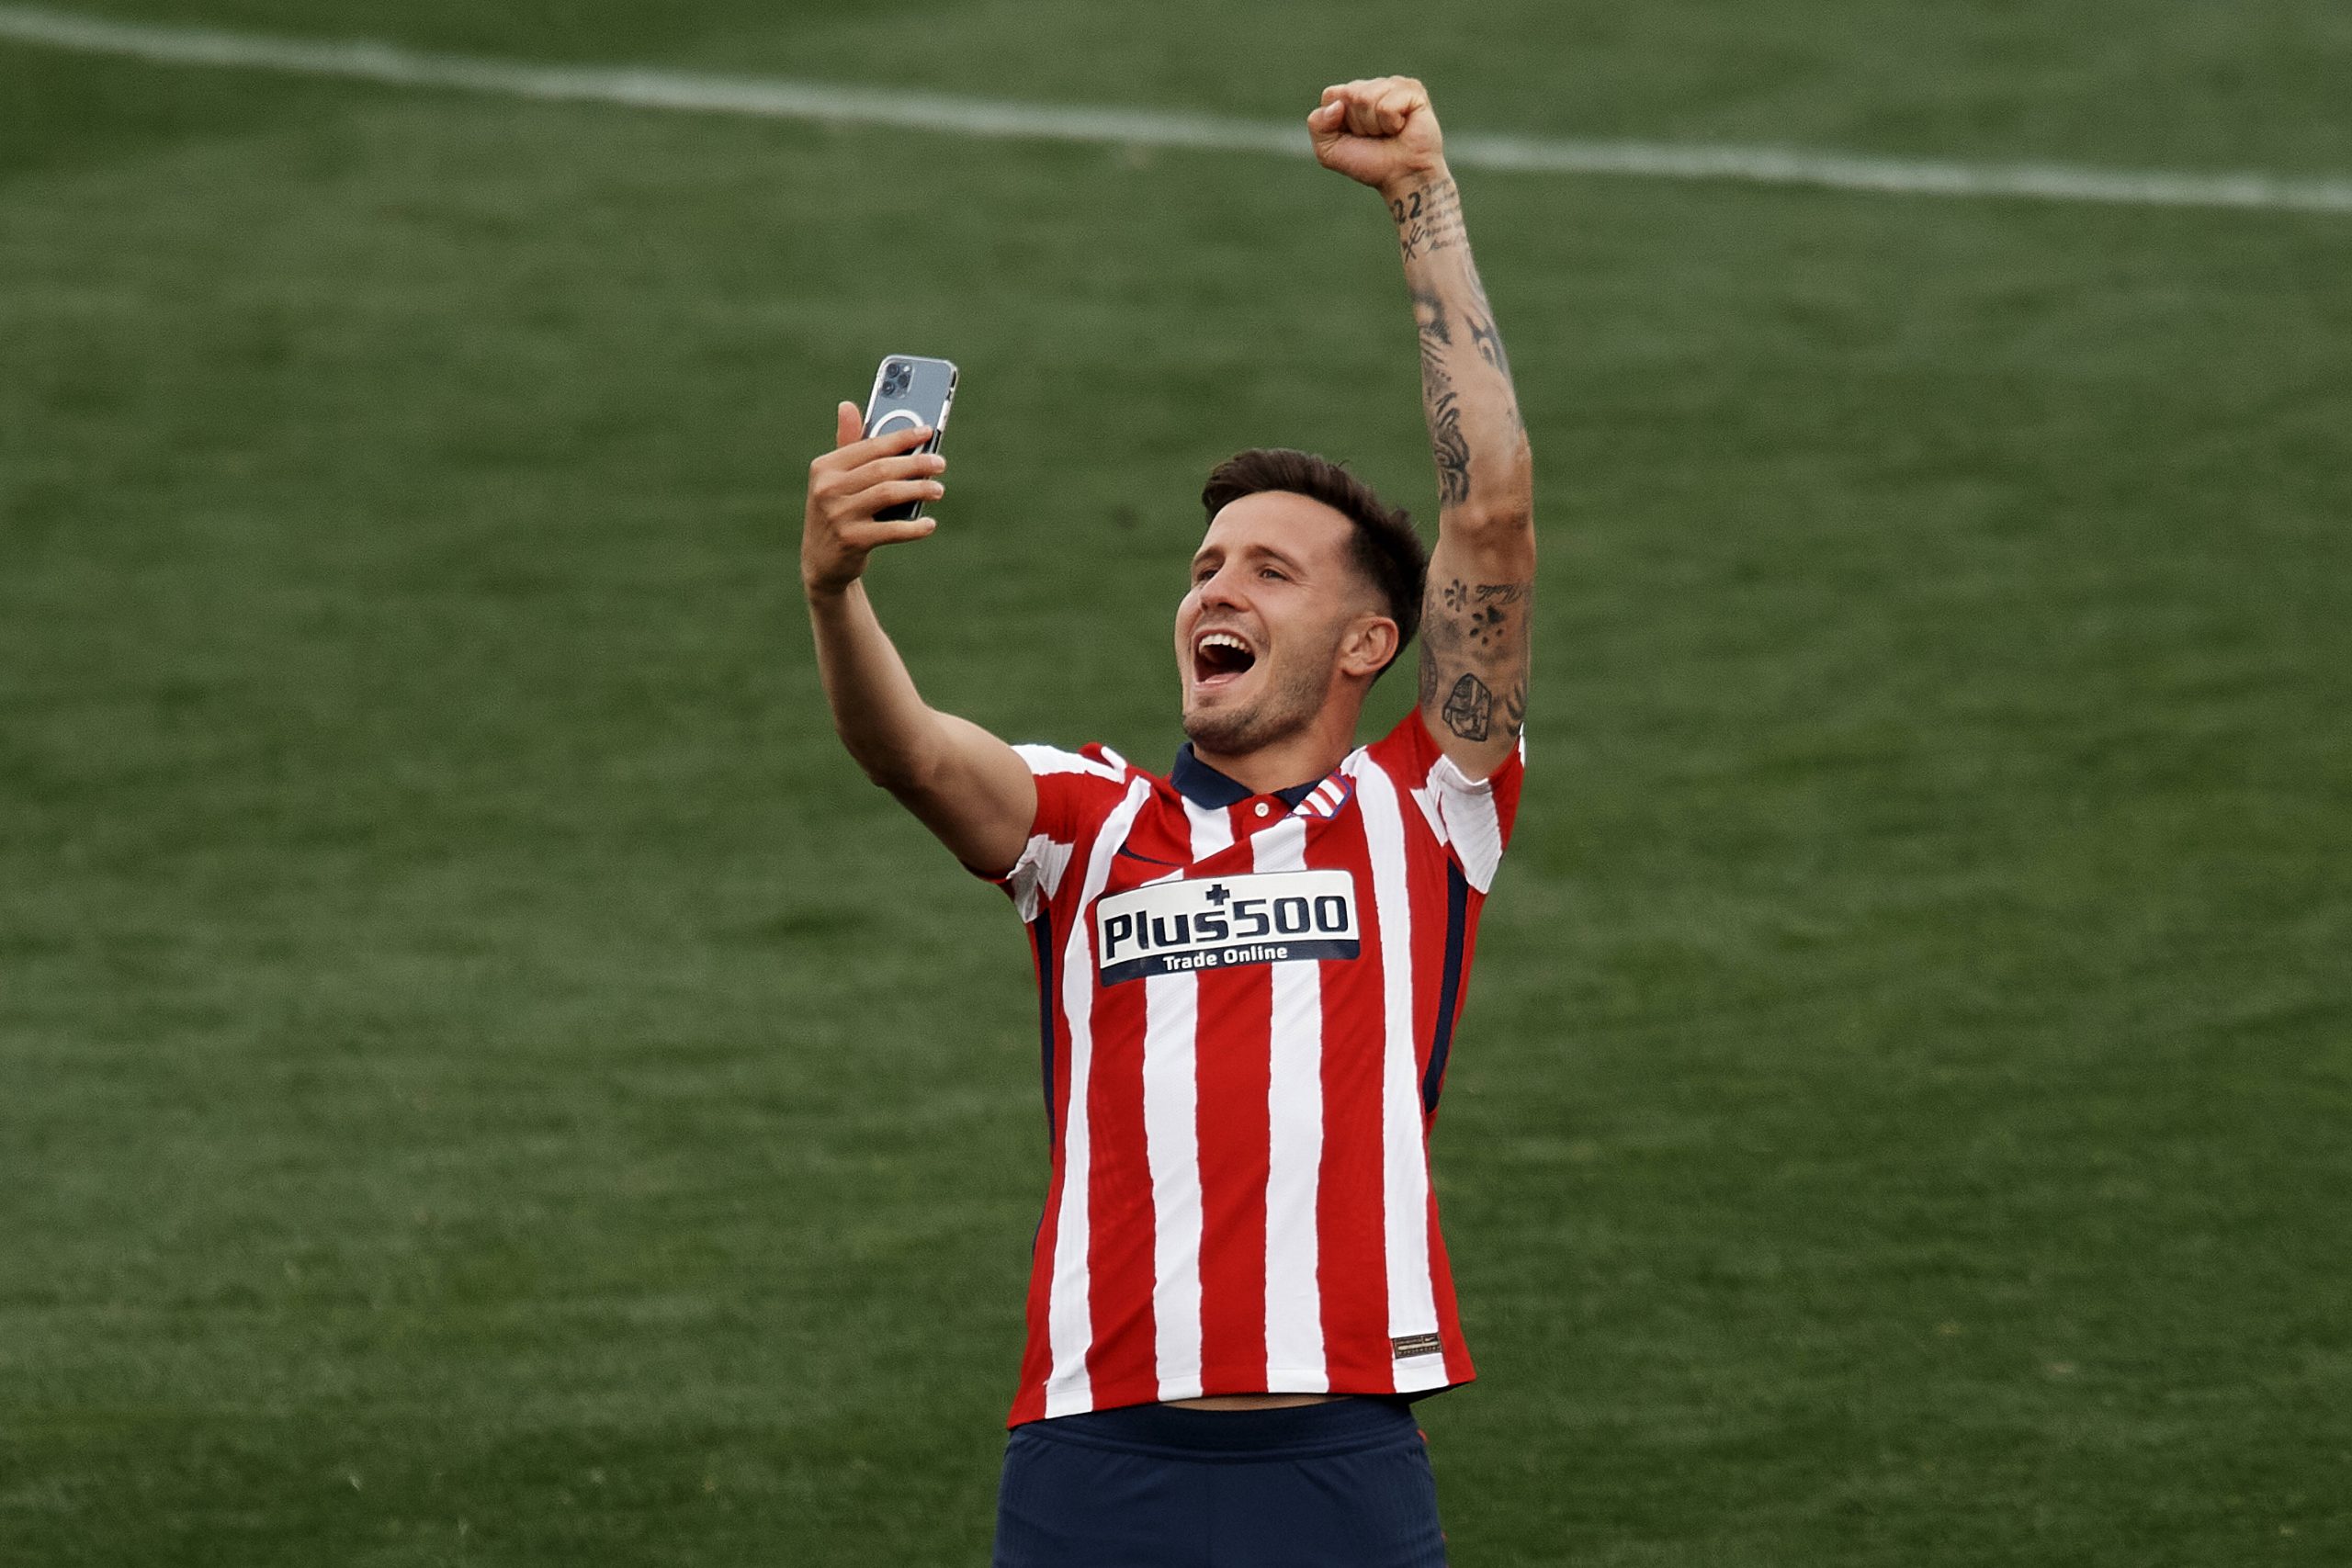 Manchester United have been linked with Atletico Madrid and Spain midfielder, Saul Niguez.